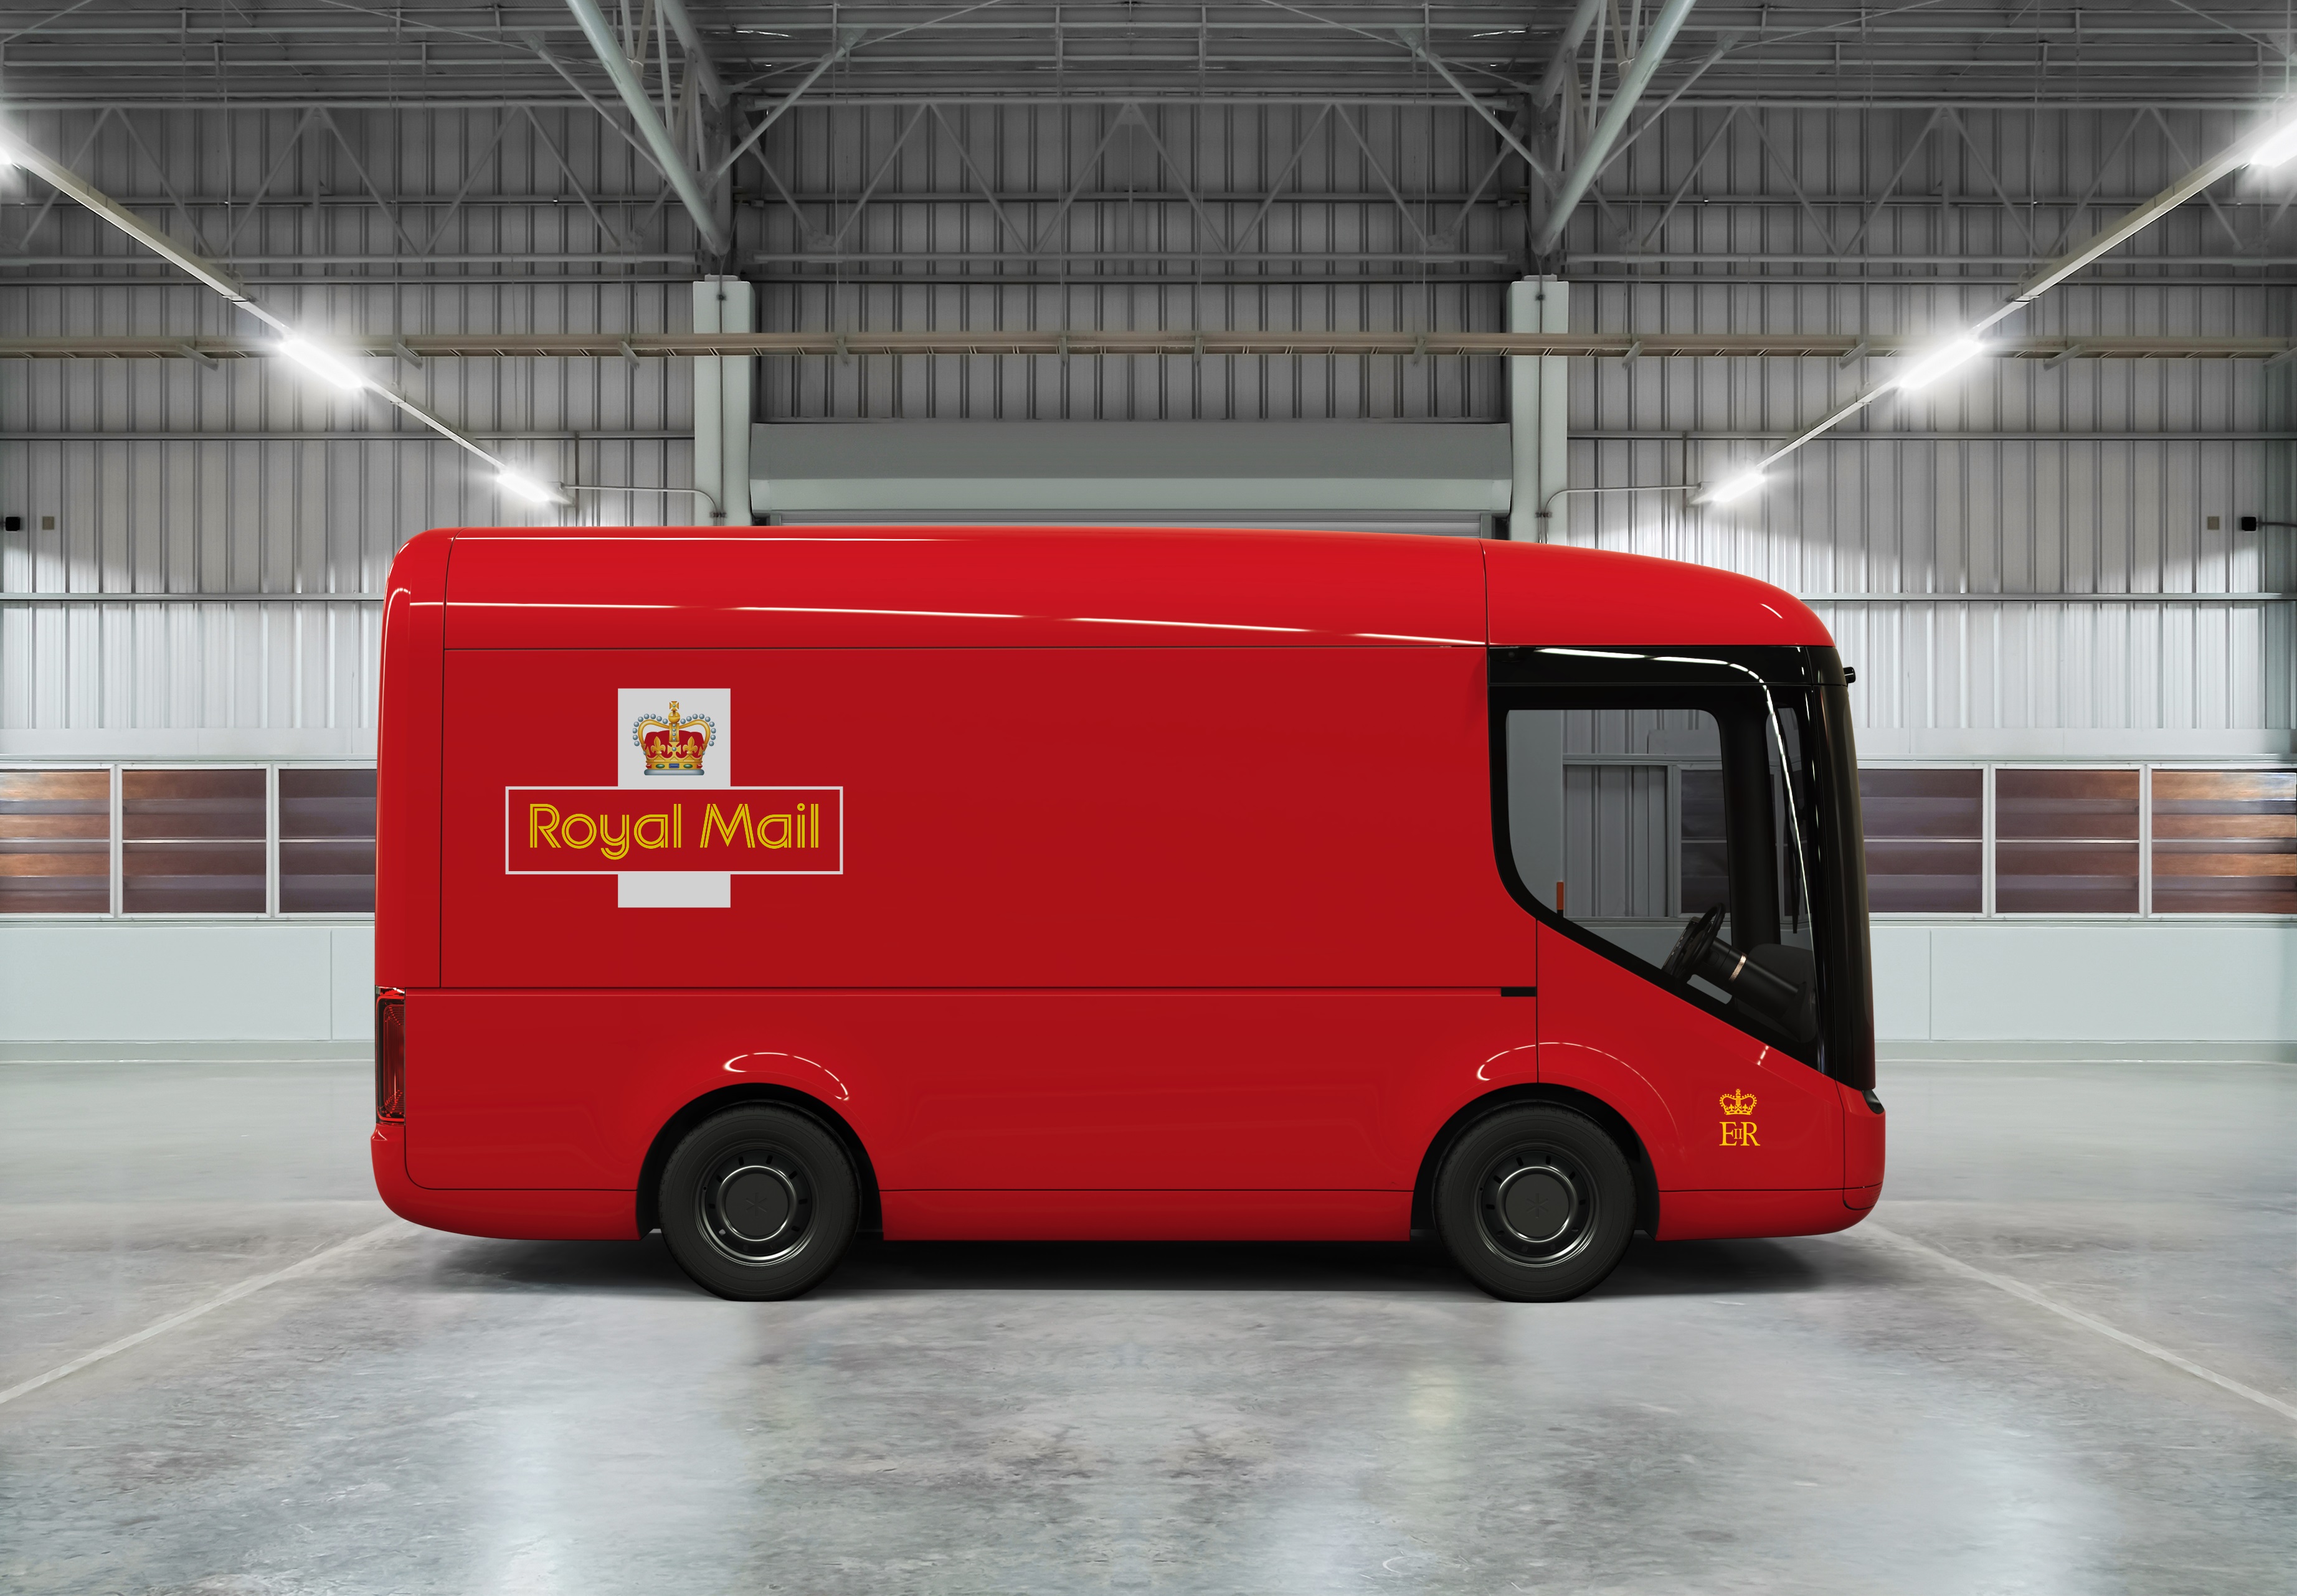 Royal Mail is testing these futuristiclooking electric vans The